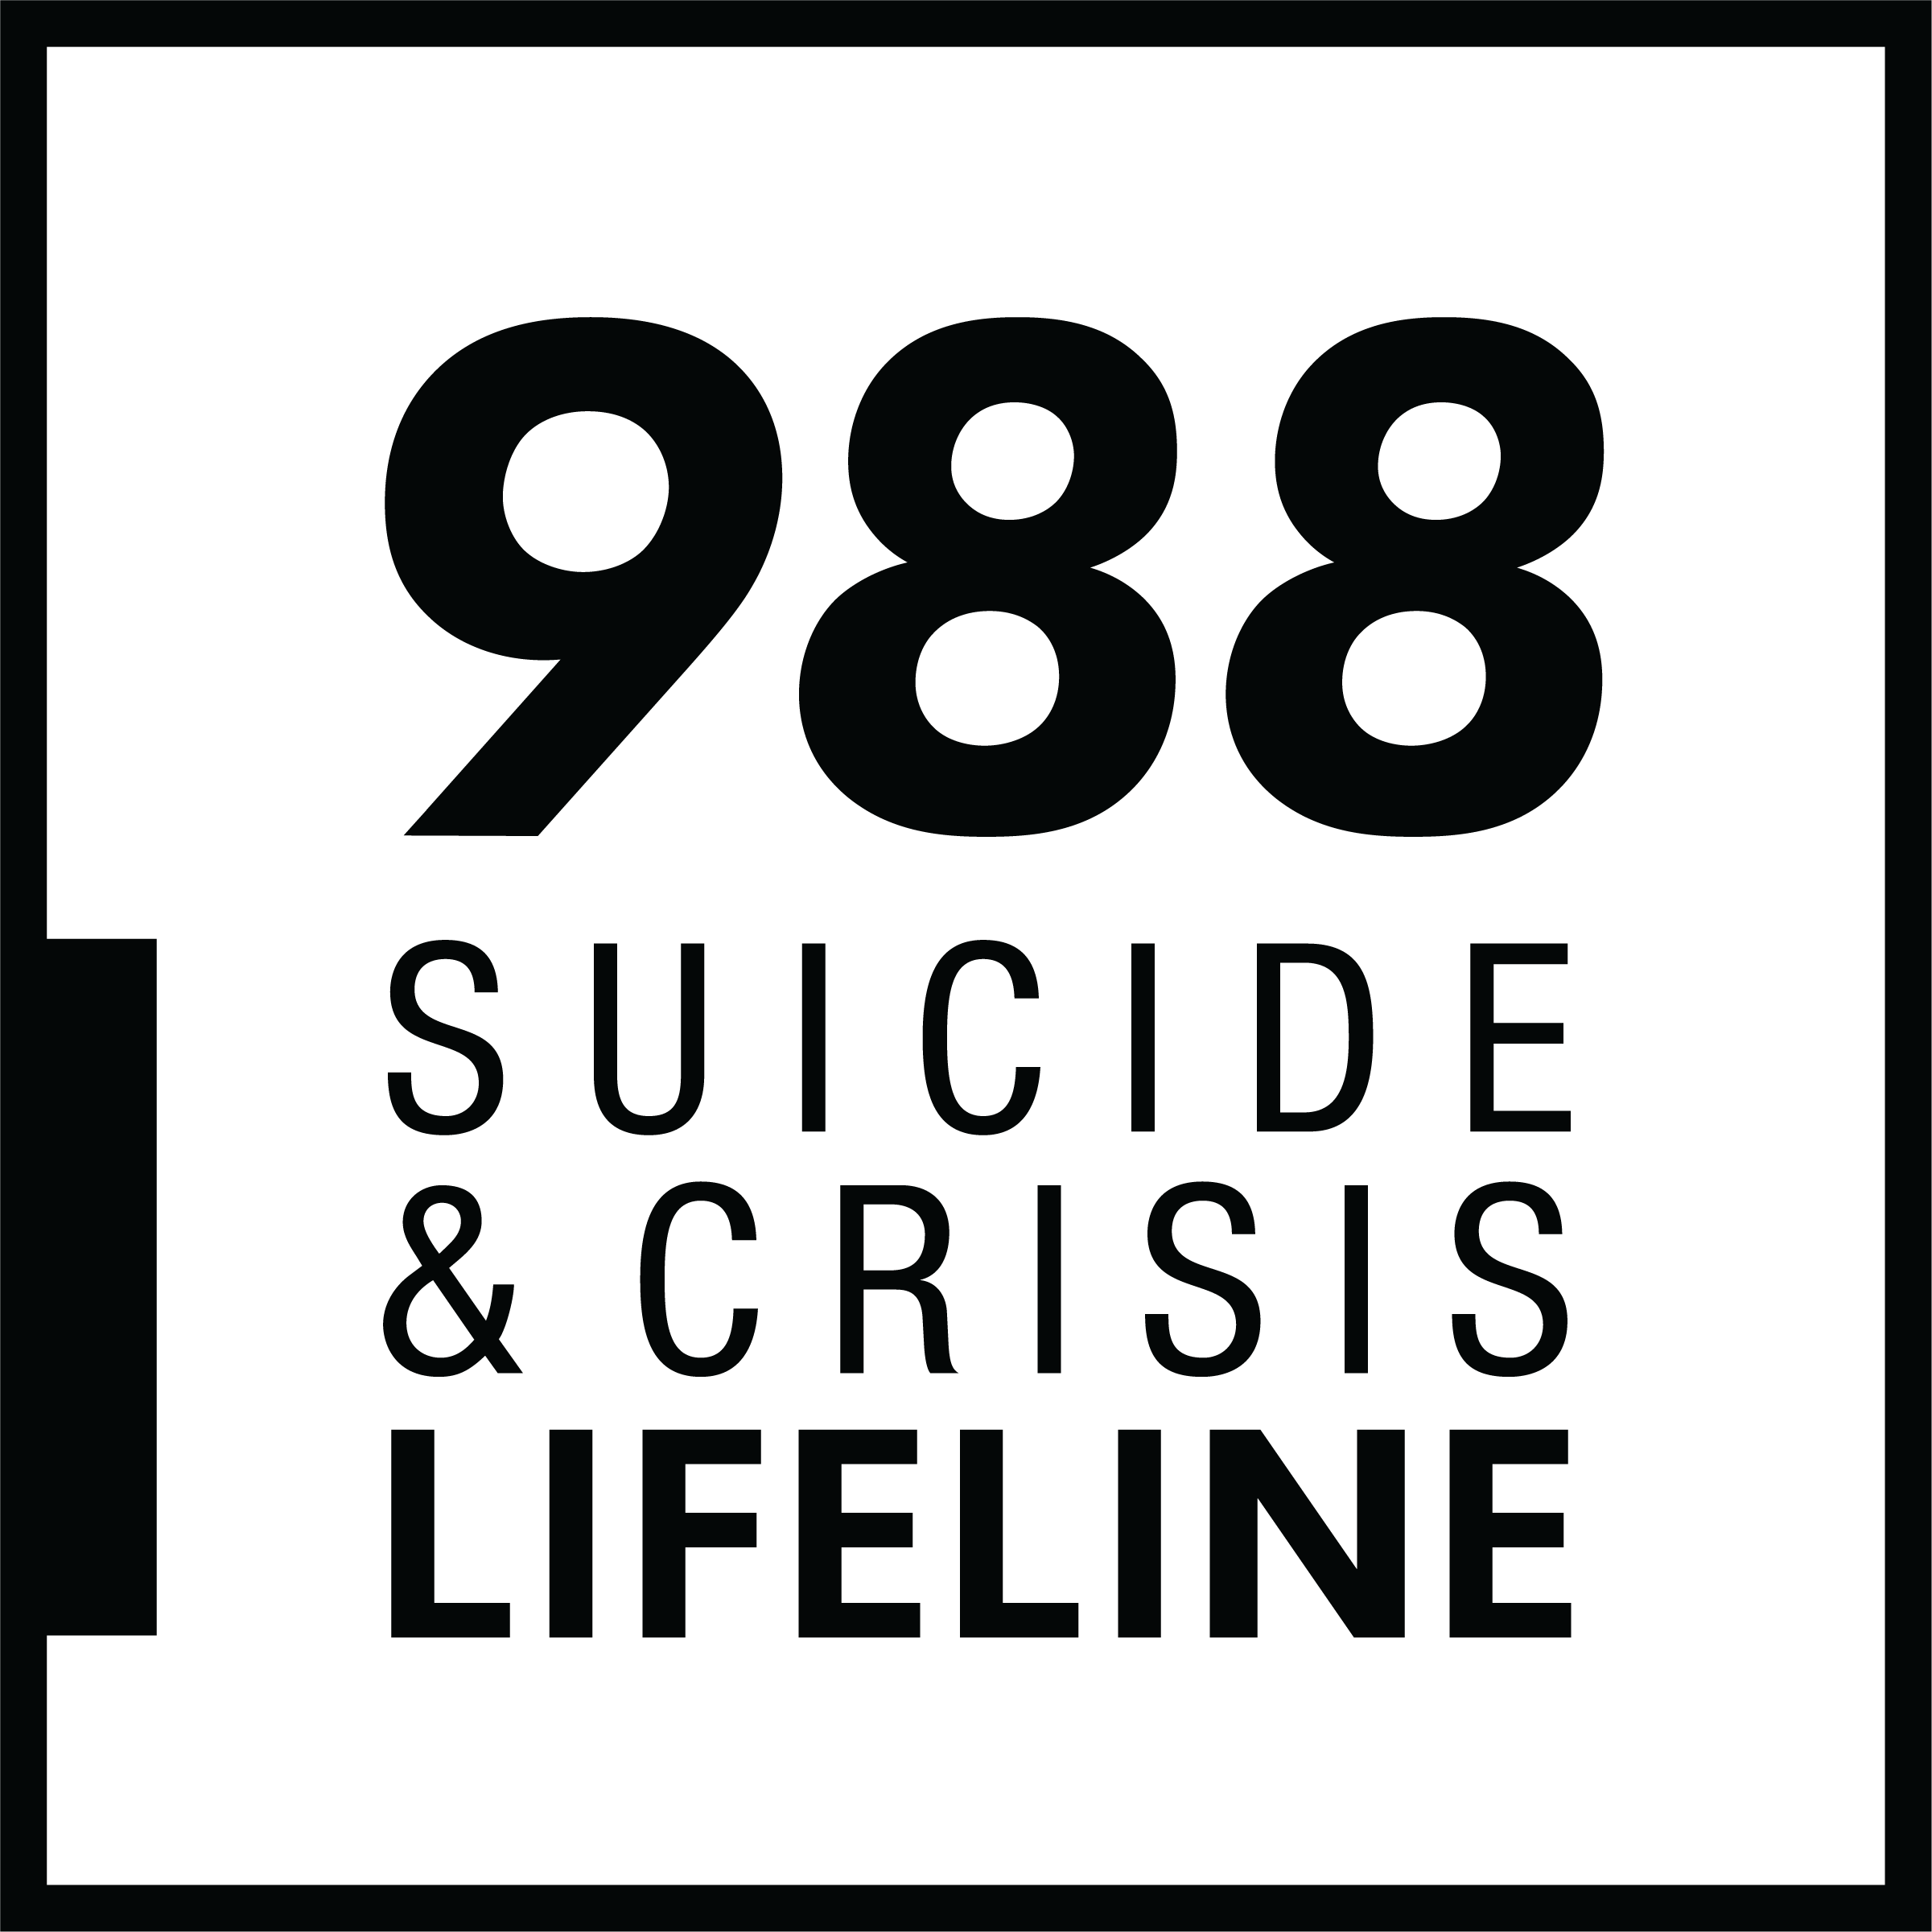 Logo of the National Suicide & Crisis Lifeline with their number to call or text in English or Spanish, 988 in black and white